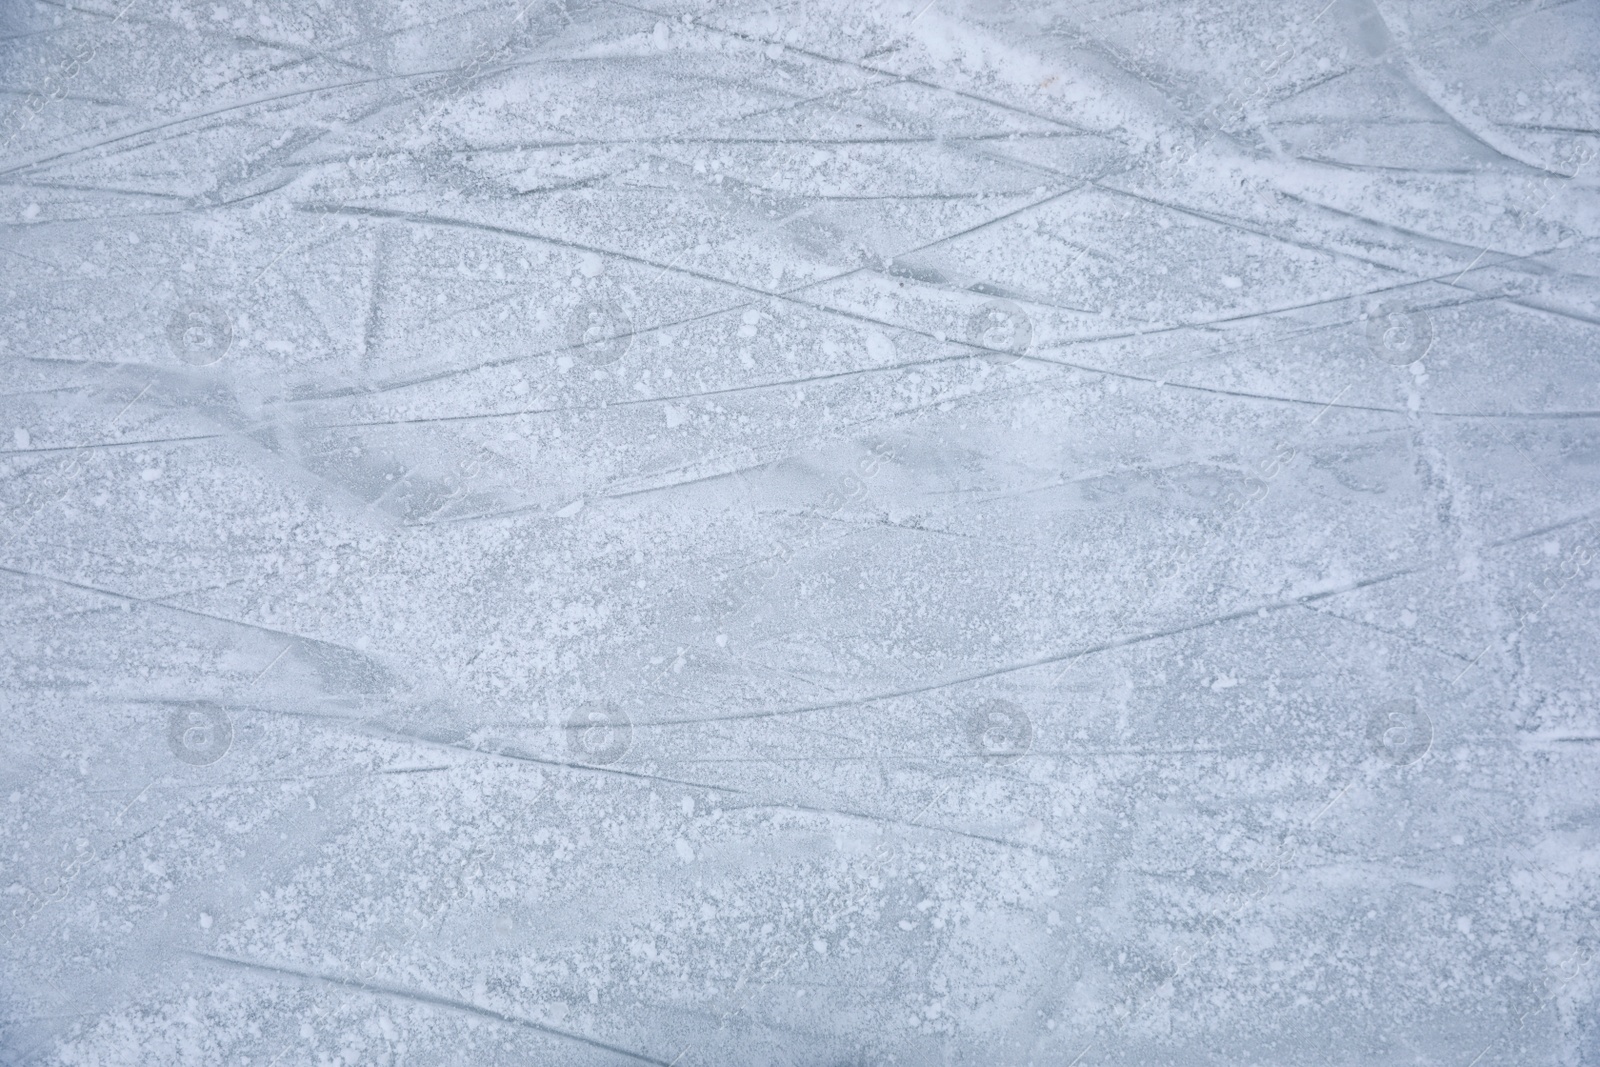 Photo of Traces left by figure skate blades on ice. Winter outdoors activities